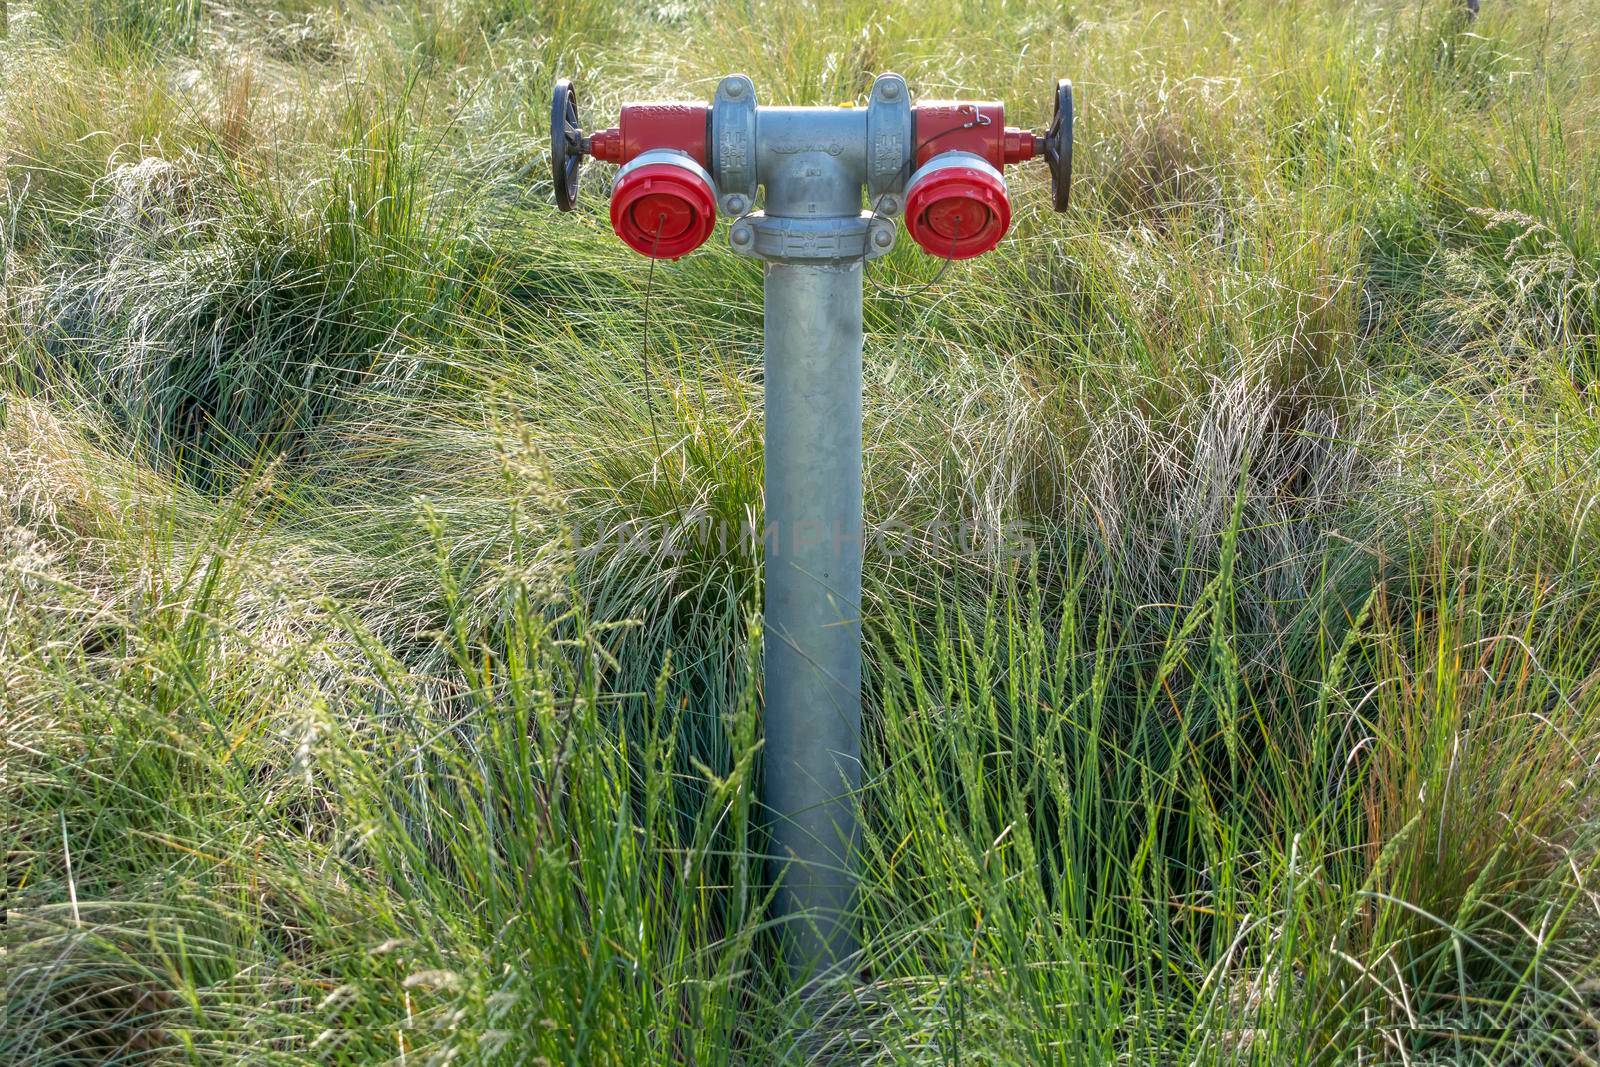 An industrial fire hydrant outdoors amongst grass and weeds in regional Australia